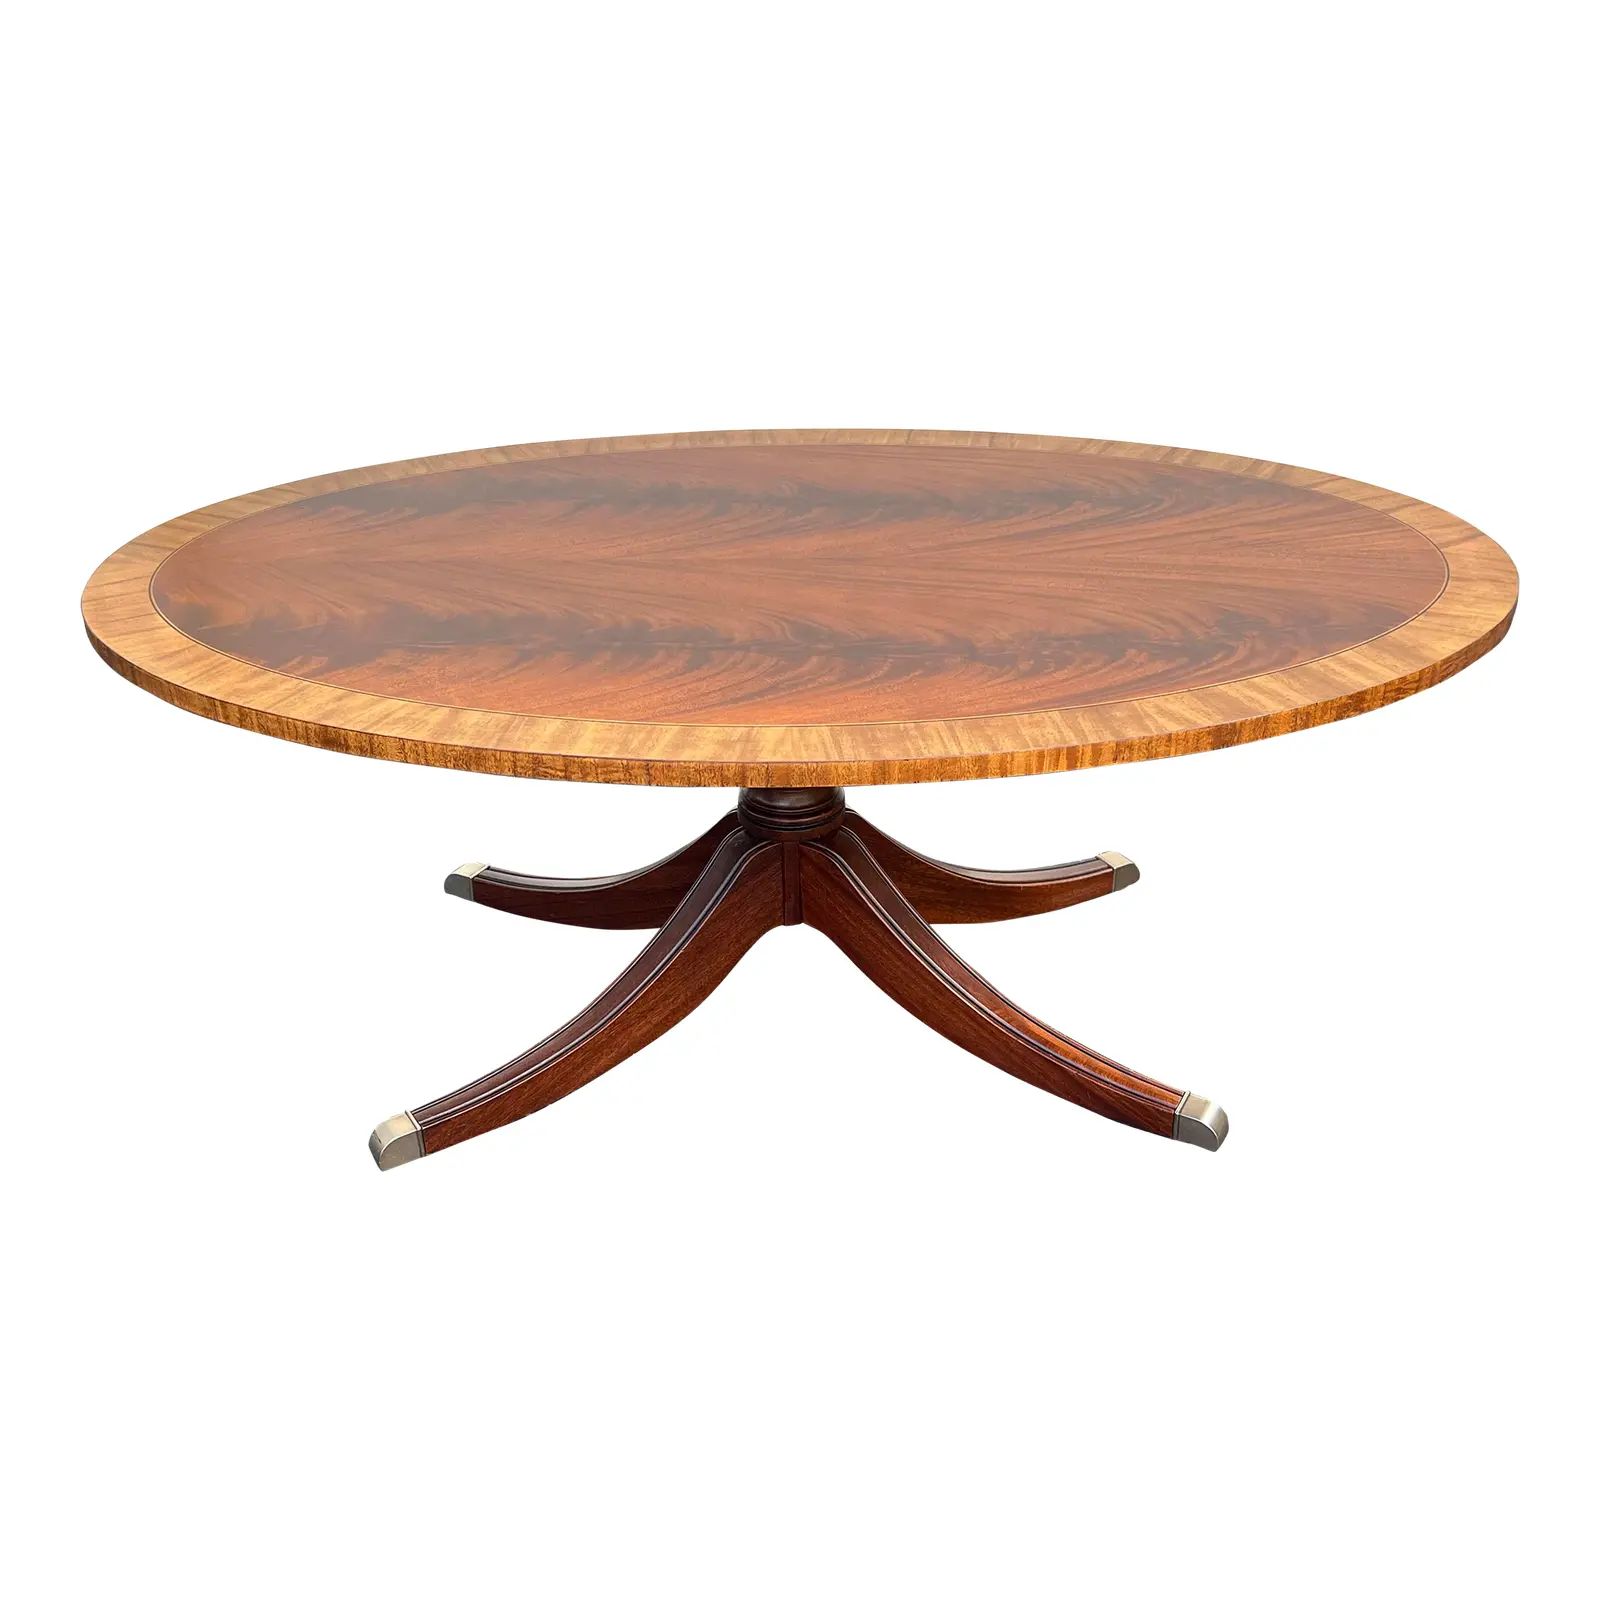 Late 20th Century Ethan Allen Regency Style Flame Mahogany Oval Coffee Table | Chairish